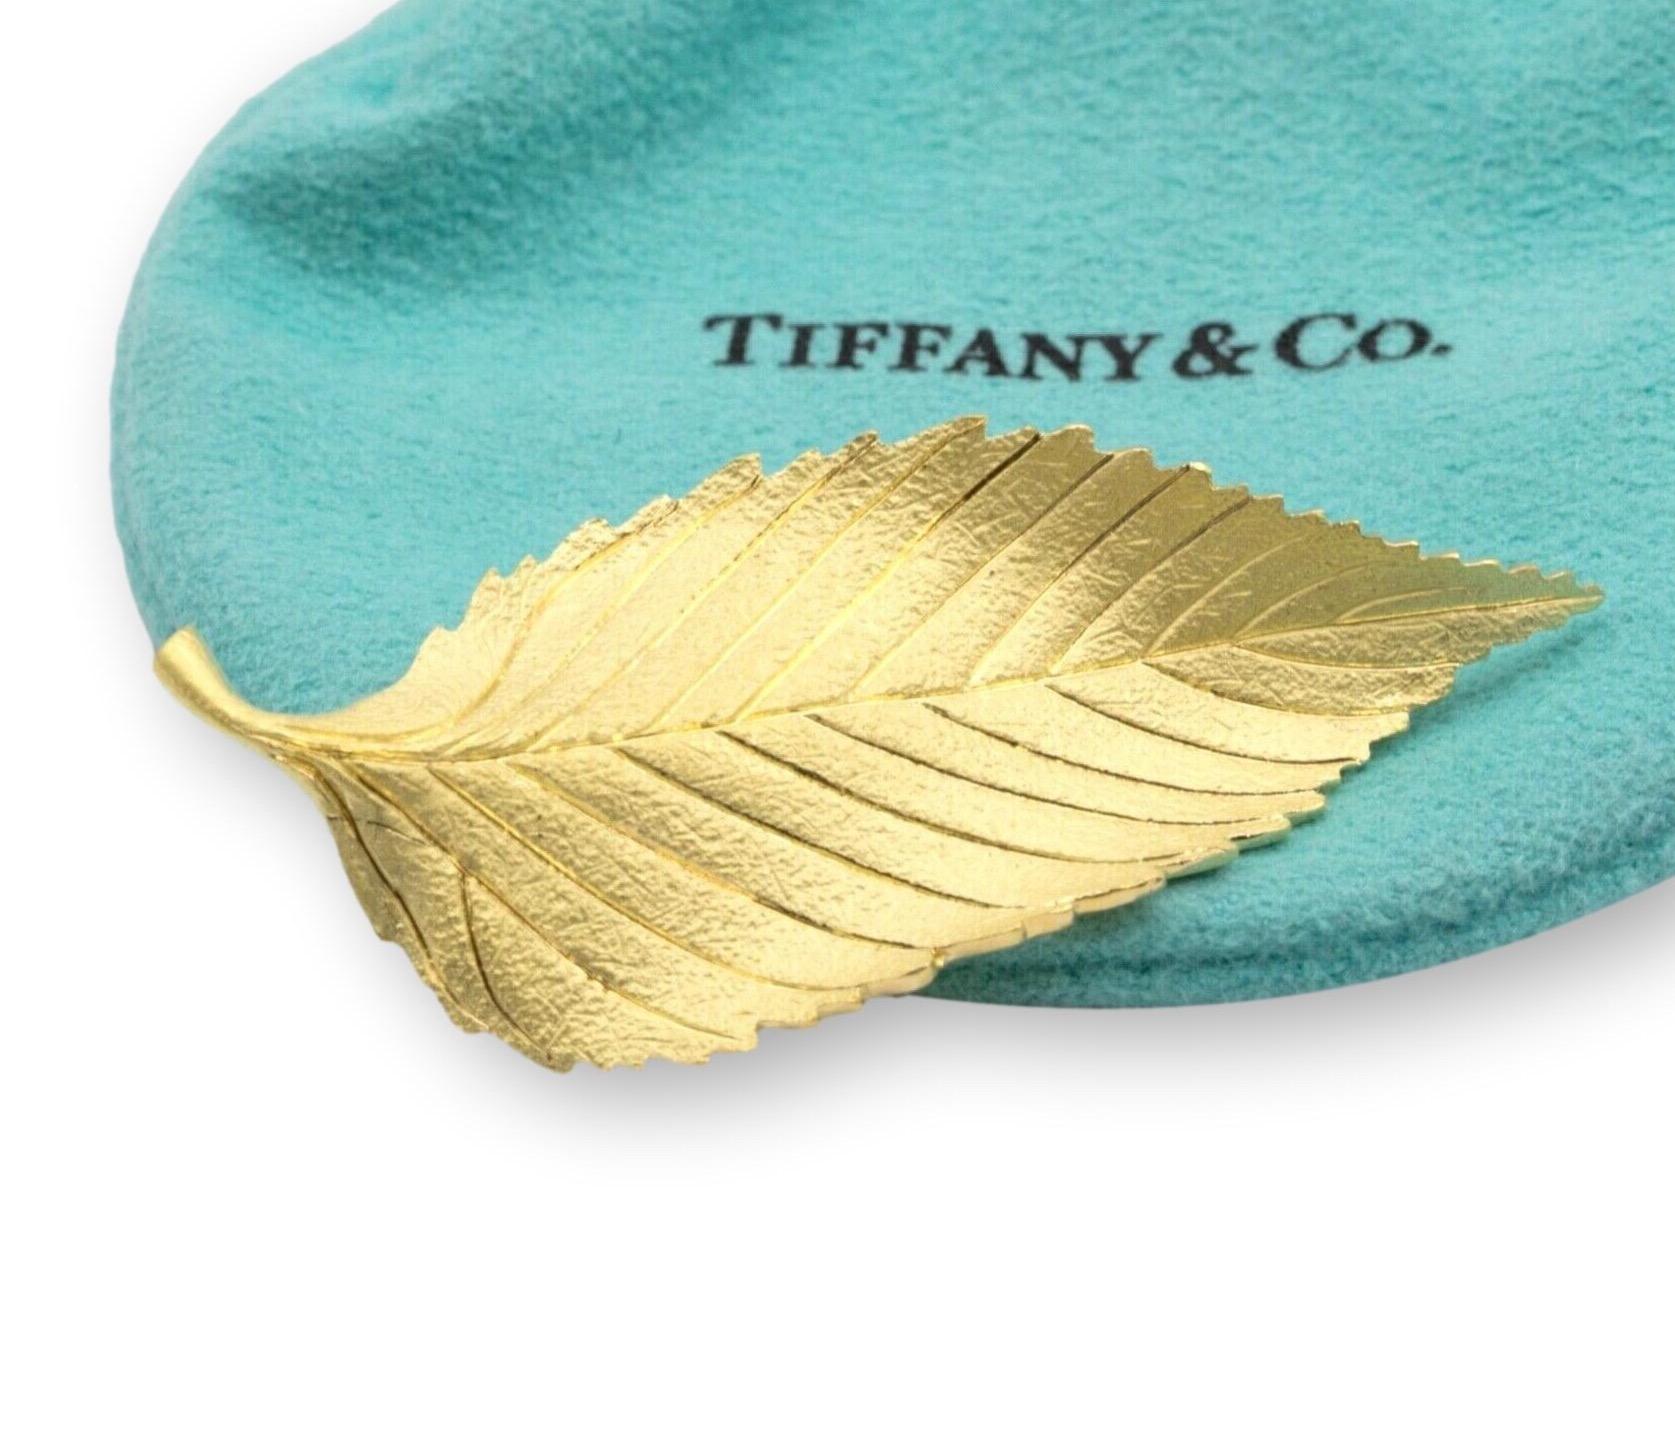 Women's or Men's Tiffany and Co. Vintage Brooch in 18k Yellow Gold in a Beech Leaf Design